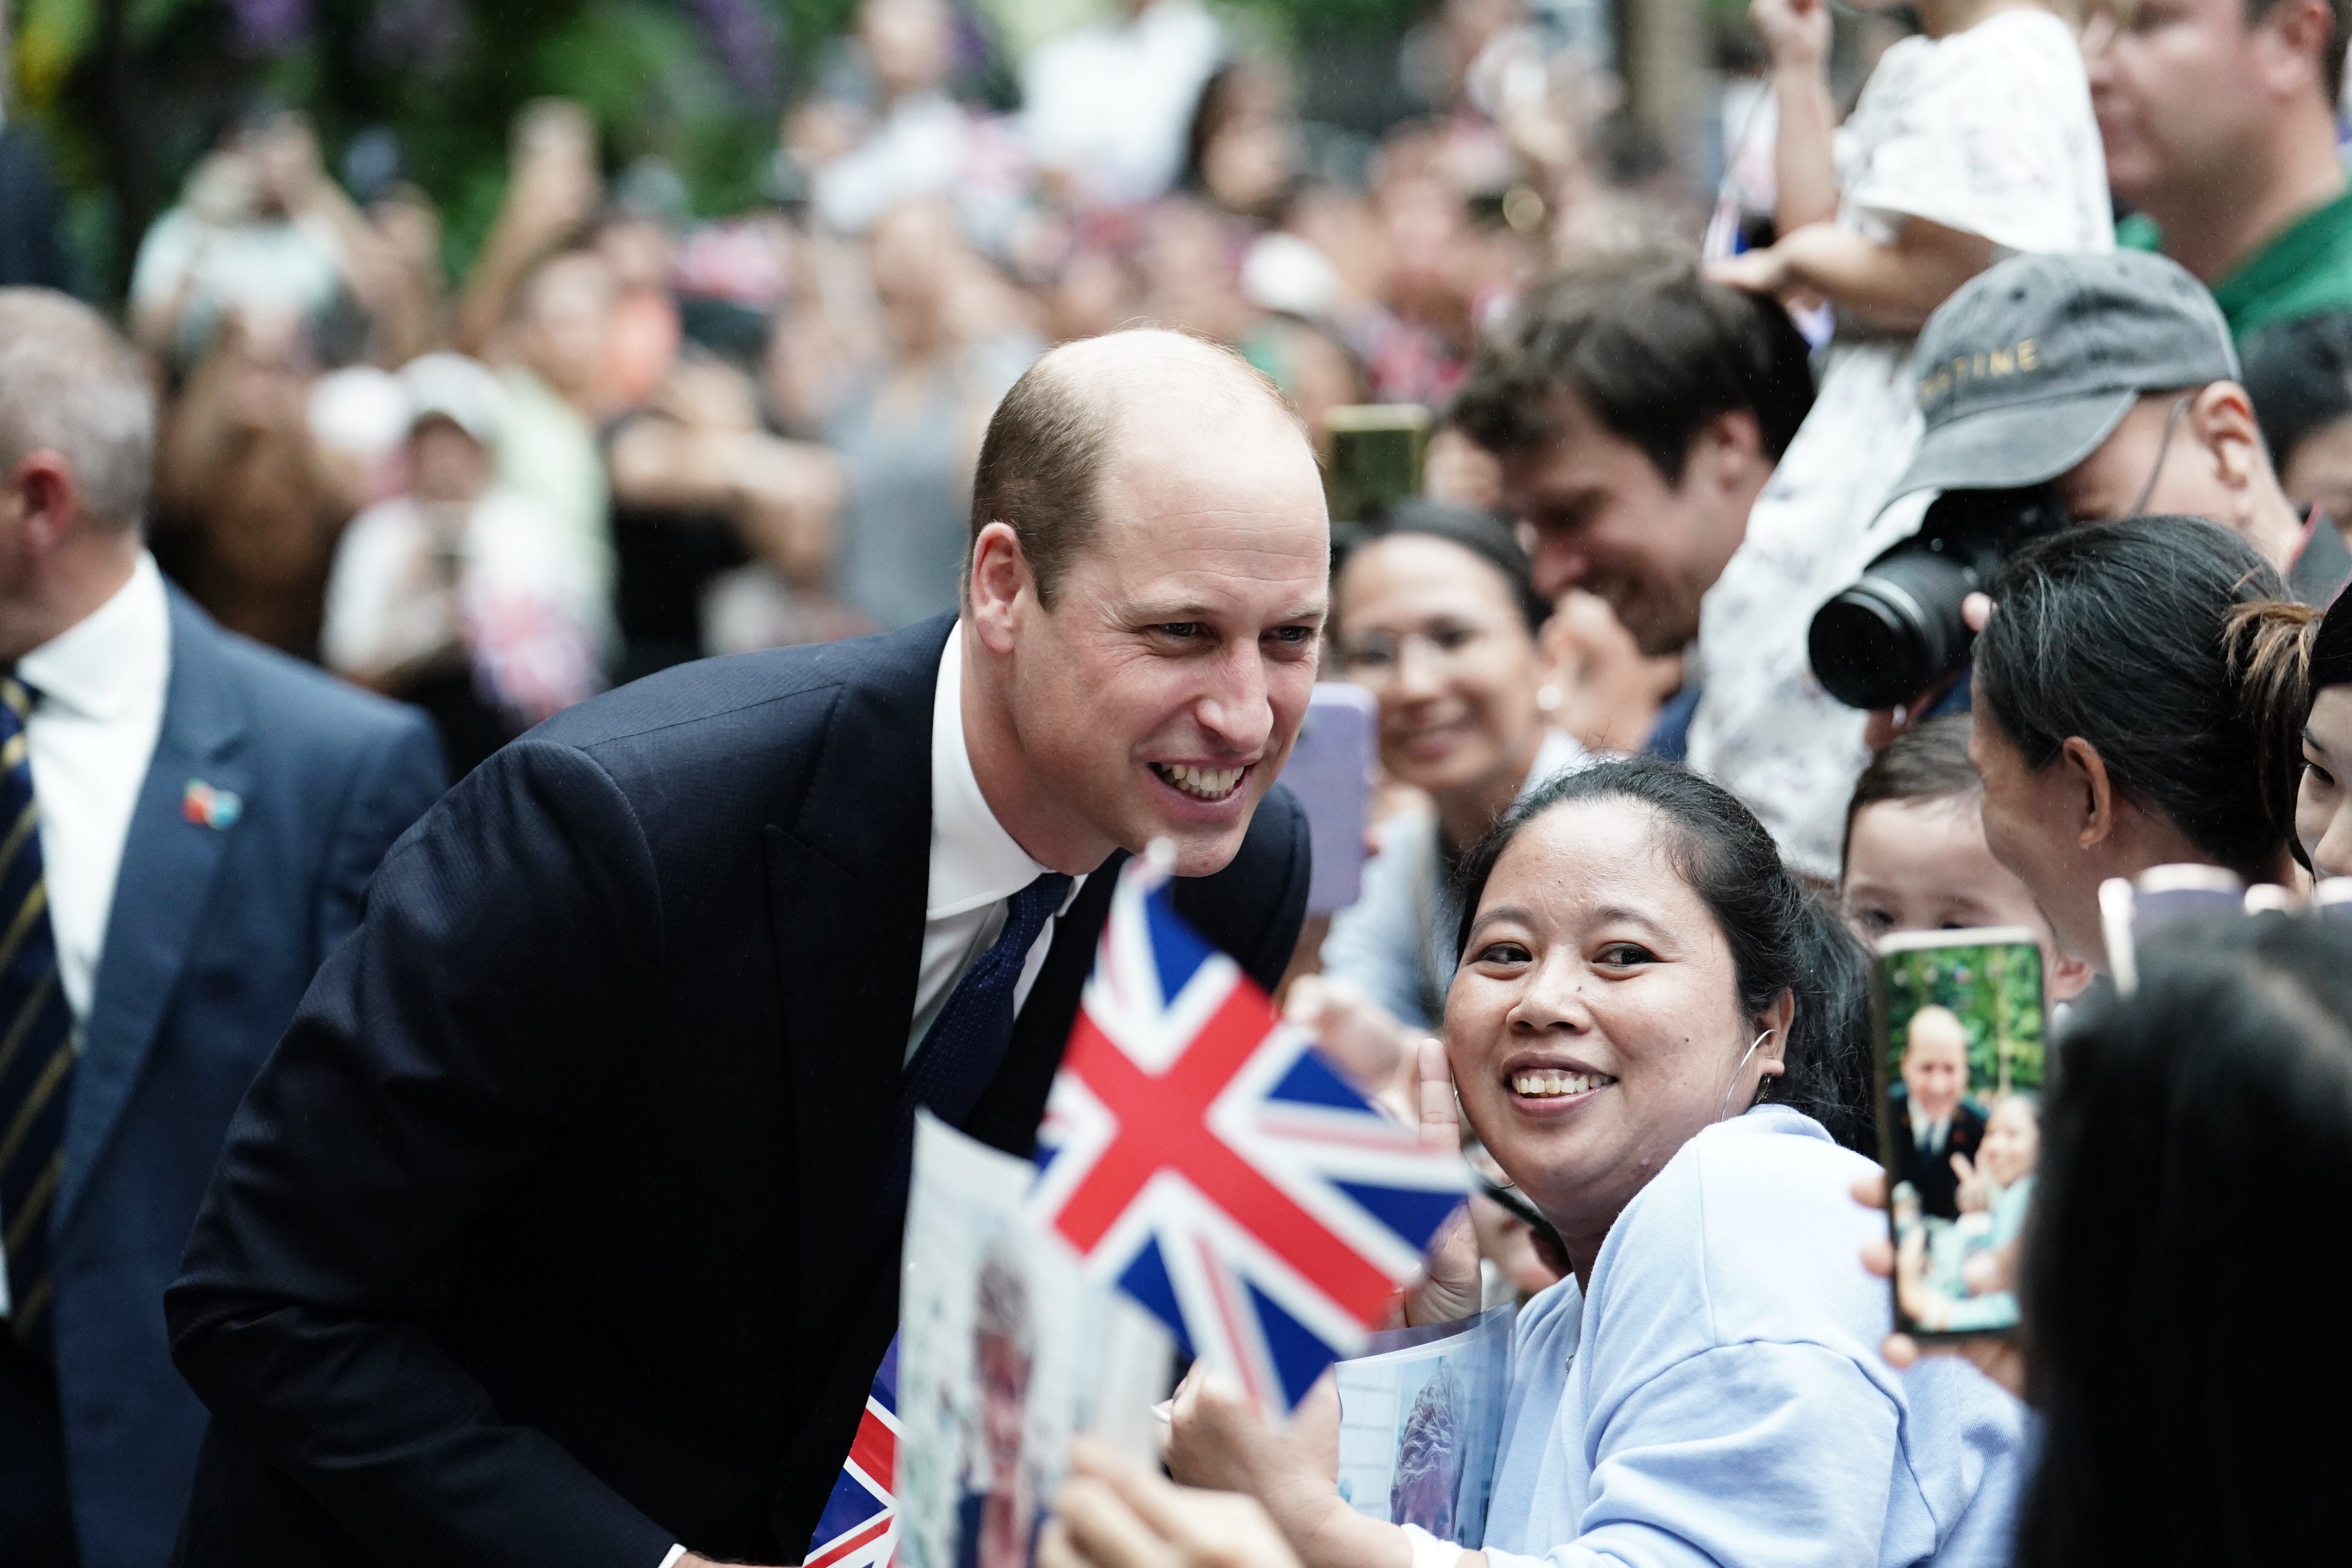 Prince William greets well-wishers as he arrives at Jewel Changi Airport in Singapore on Sunday, ahead of the third annual Earthshot Prize Awards ceremony. Photo: PA Wire / dpa